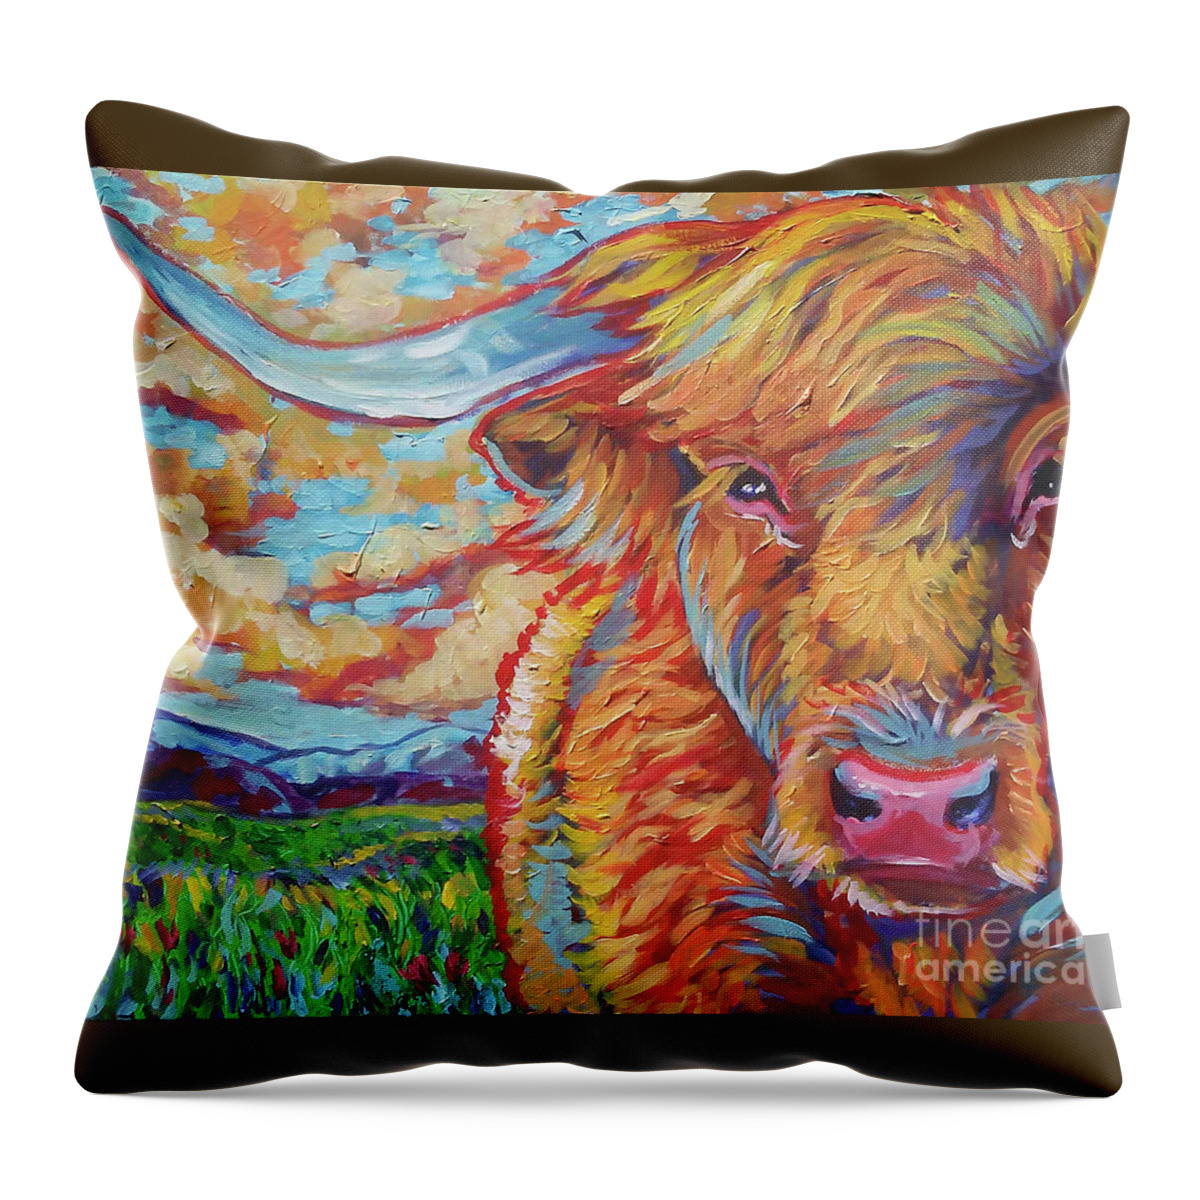 Highland Throw Pillow featuring the painting Highland Breeze by Jenn Cunningham